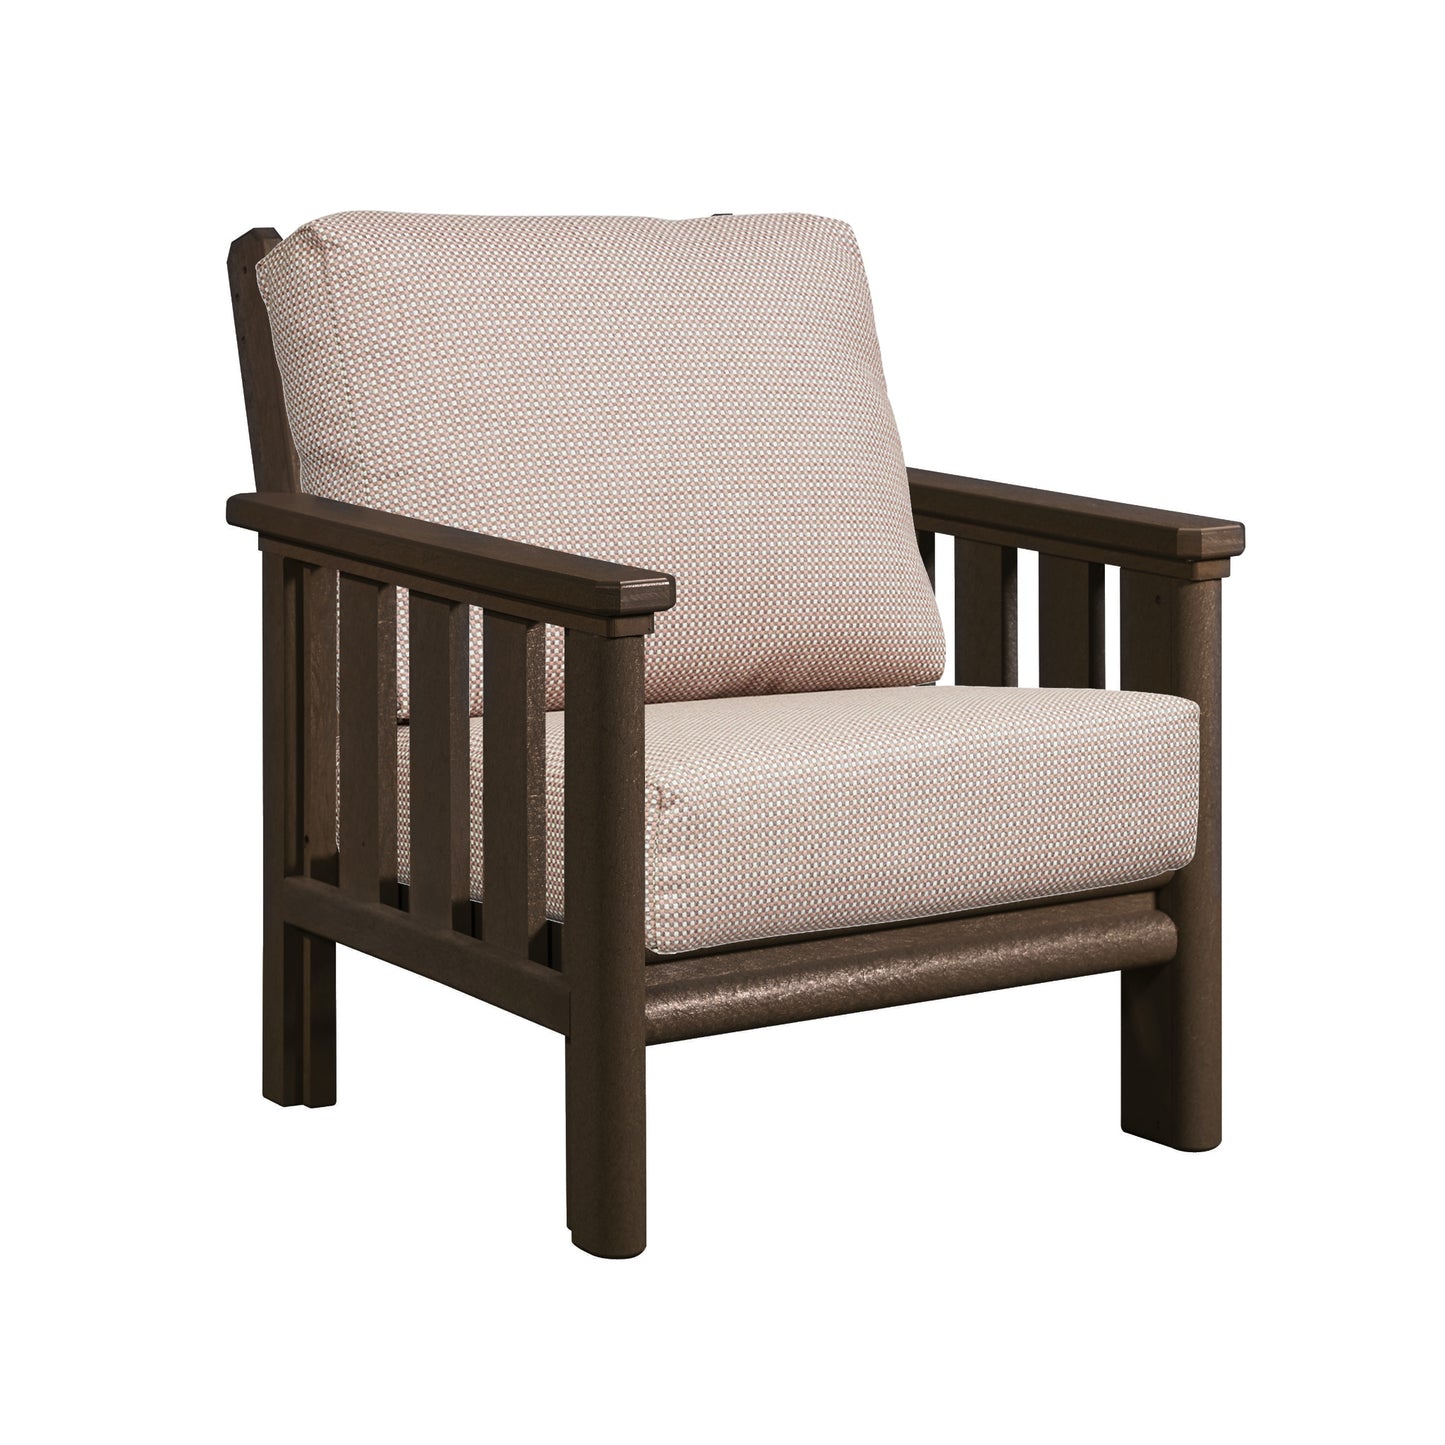 Stratford Arm Chair - CHOCOLATE FRAME WITH CUSHIONS - DSF261-16 [DSF141]